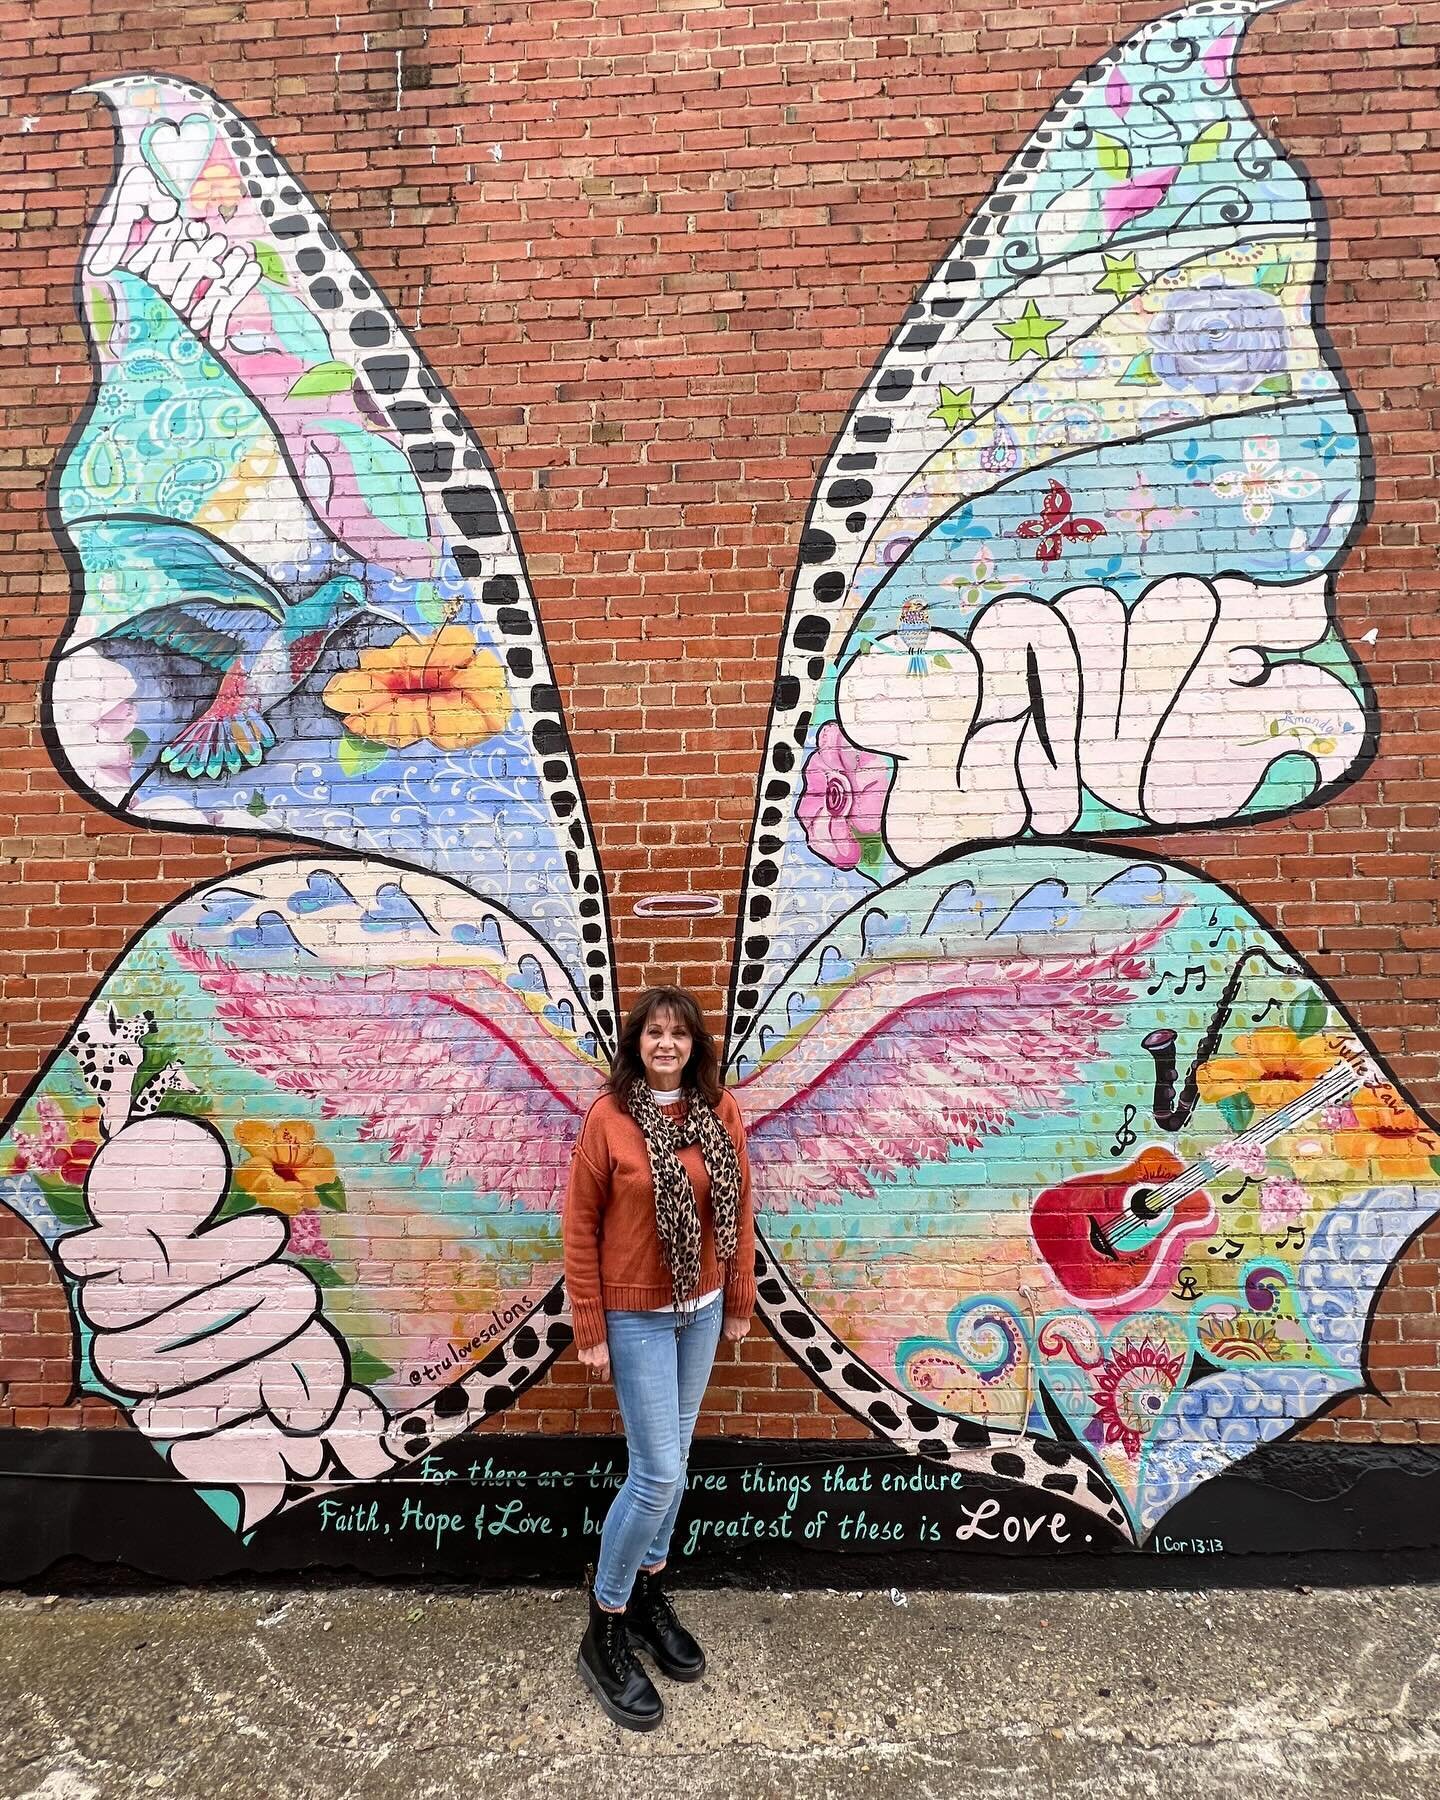 While we aren&rsquo;t open on Sundays, our beautiful mural always stands inviting, there for you to snap a photo as reminder that love endures. 🥰 Looking beautiful Tina! 🦋 Tag us in your pics! #trulovesalons #waxahachieart #artofwahachie #hachiebut